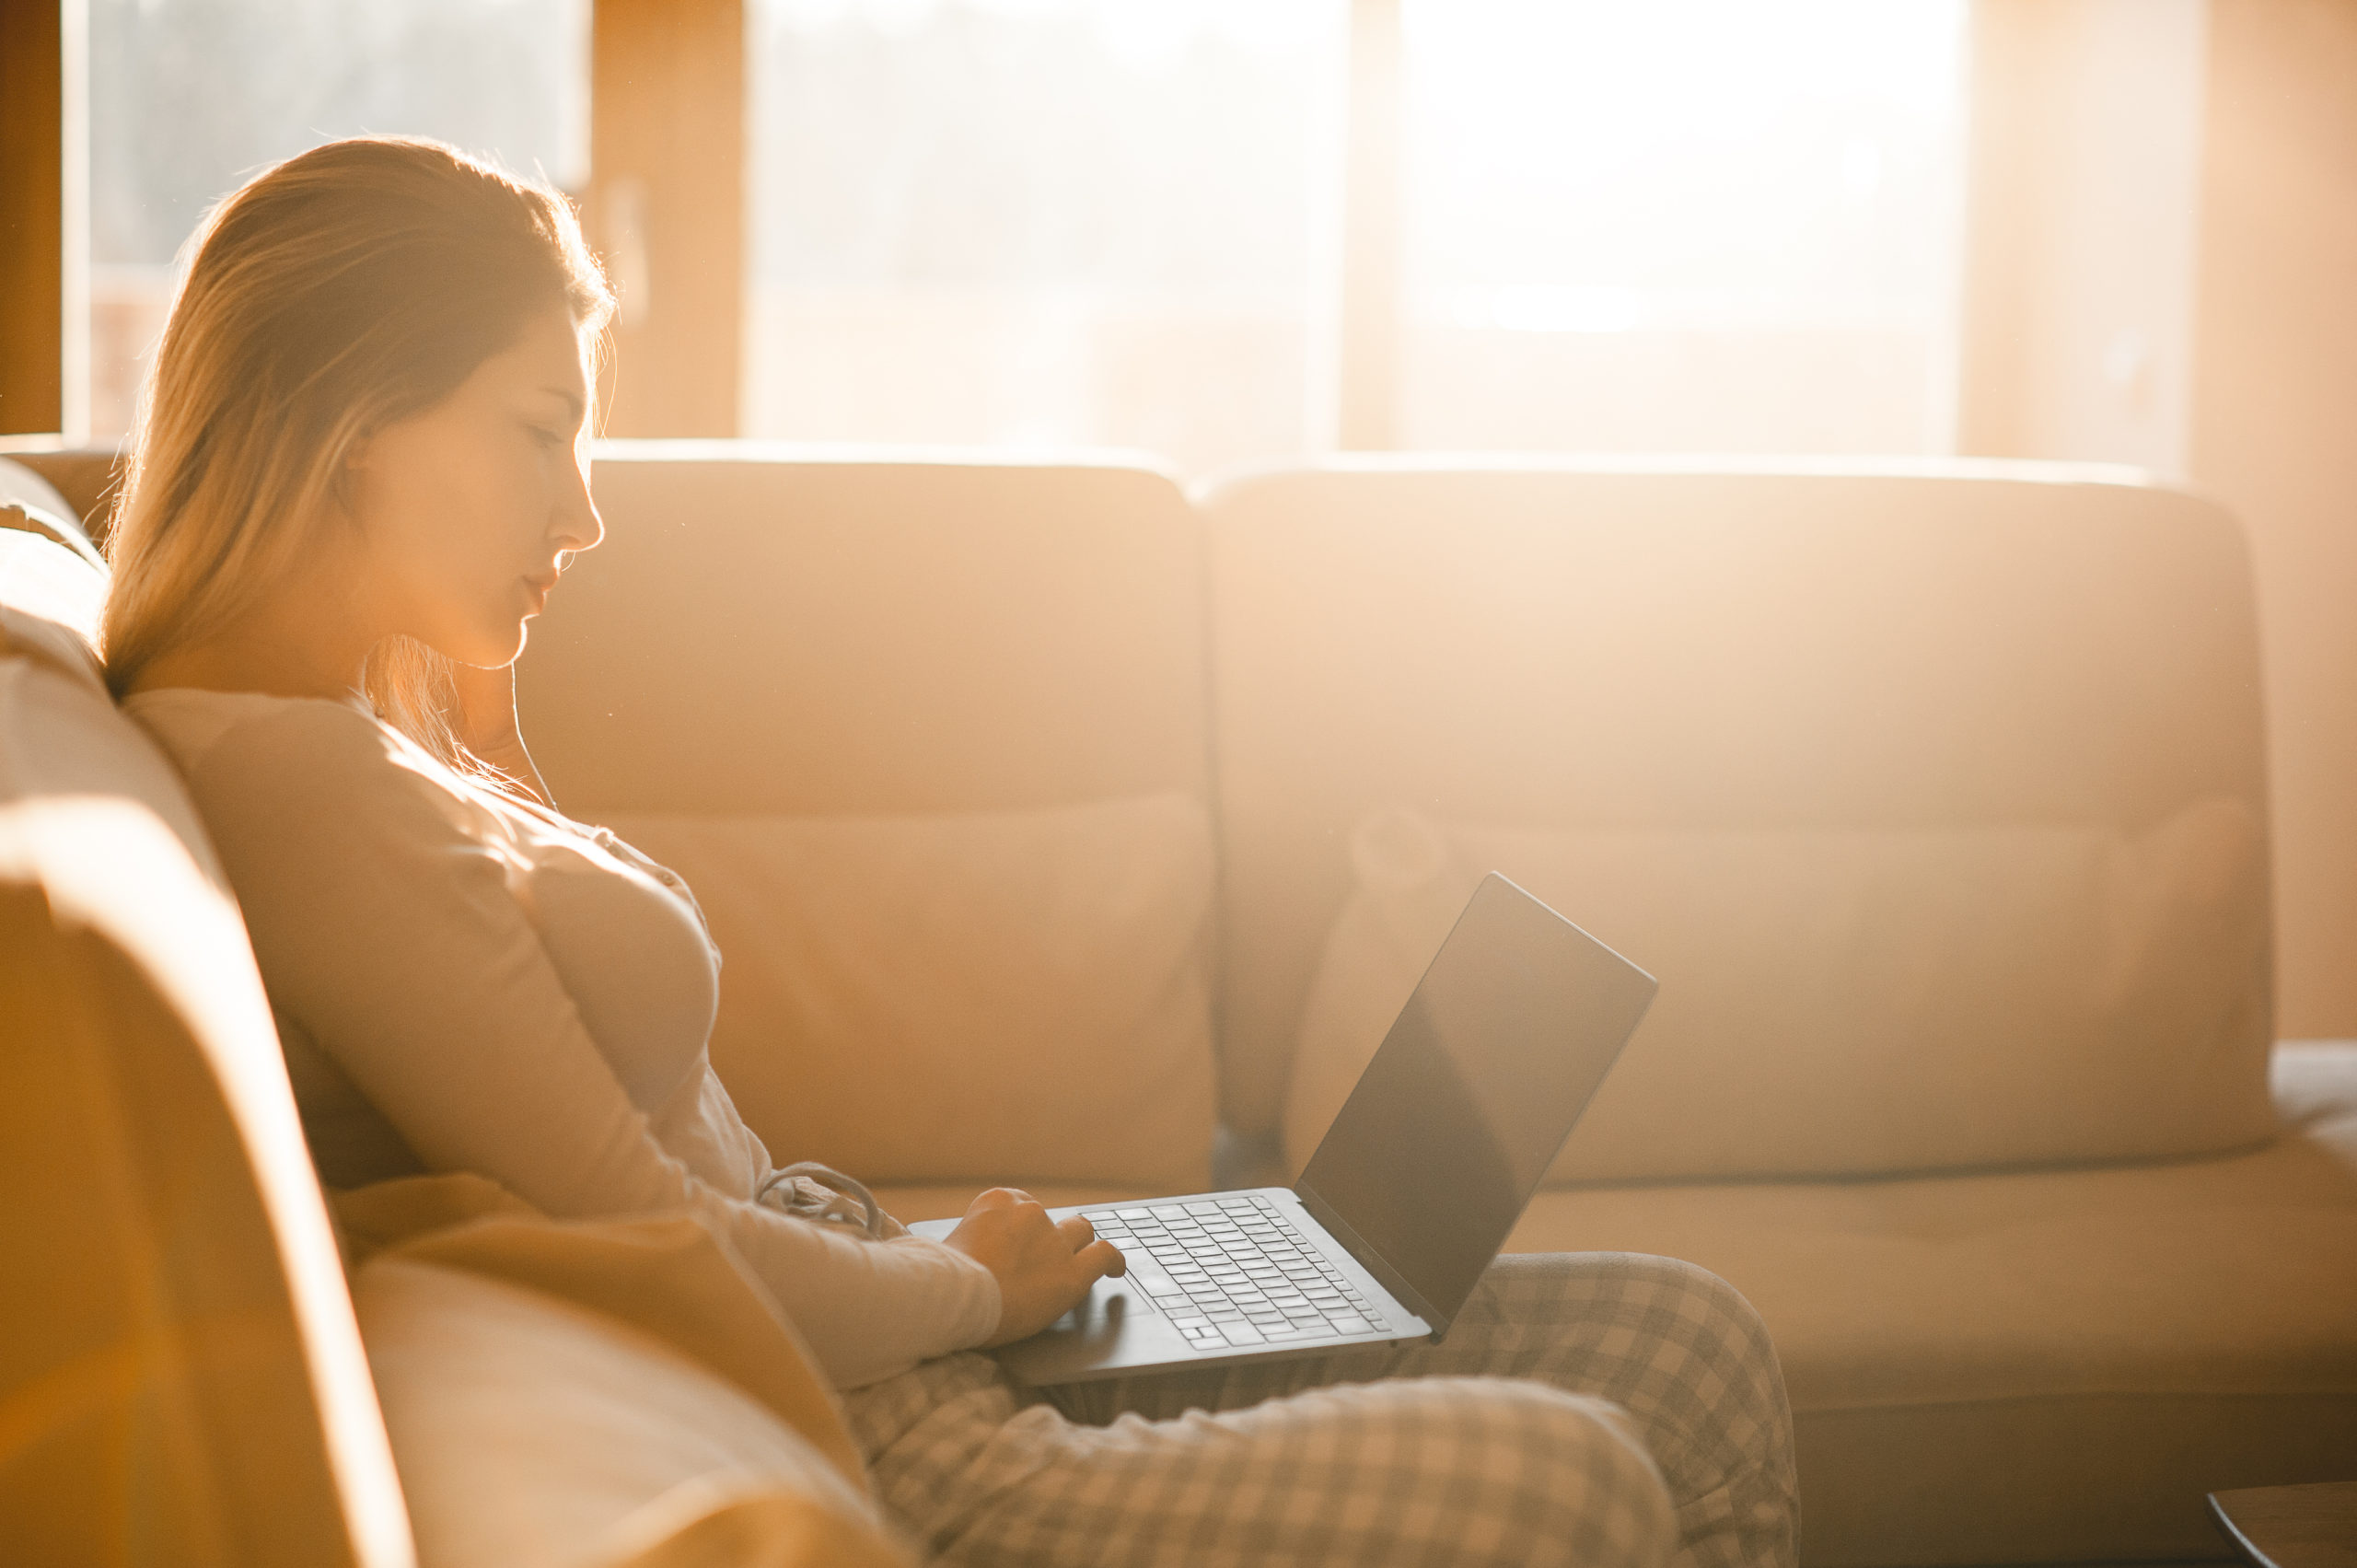 Woman sitting on her couch on her laptopped, bathed in sunlight.